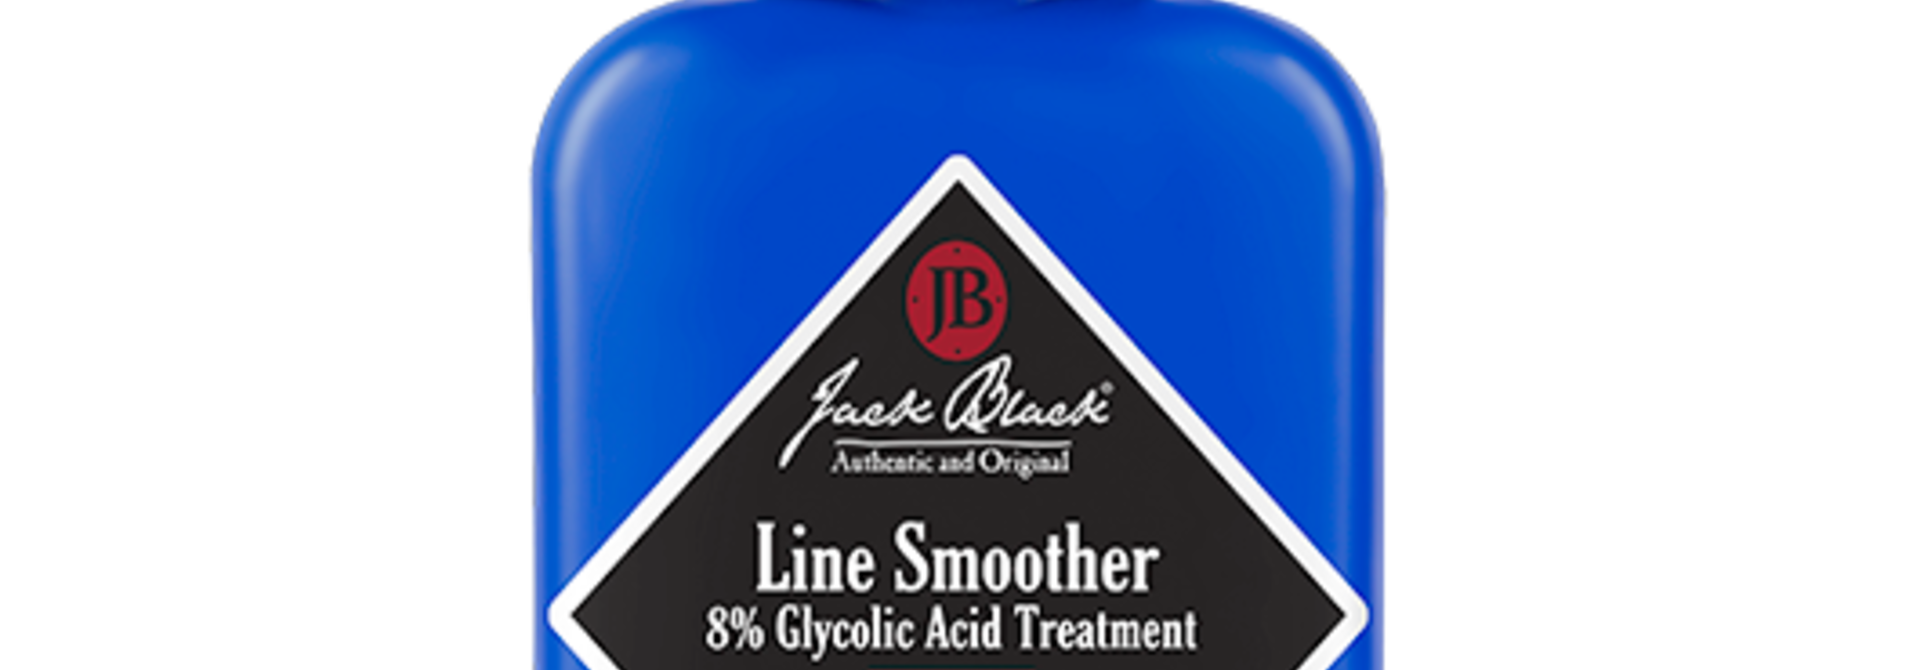 Line Smoother Glycolic Acid Treatment | The Facial Skincare Collection